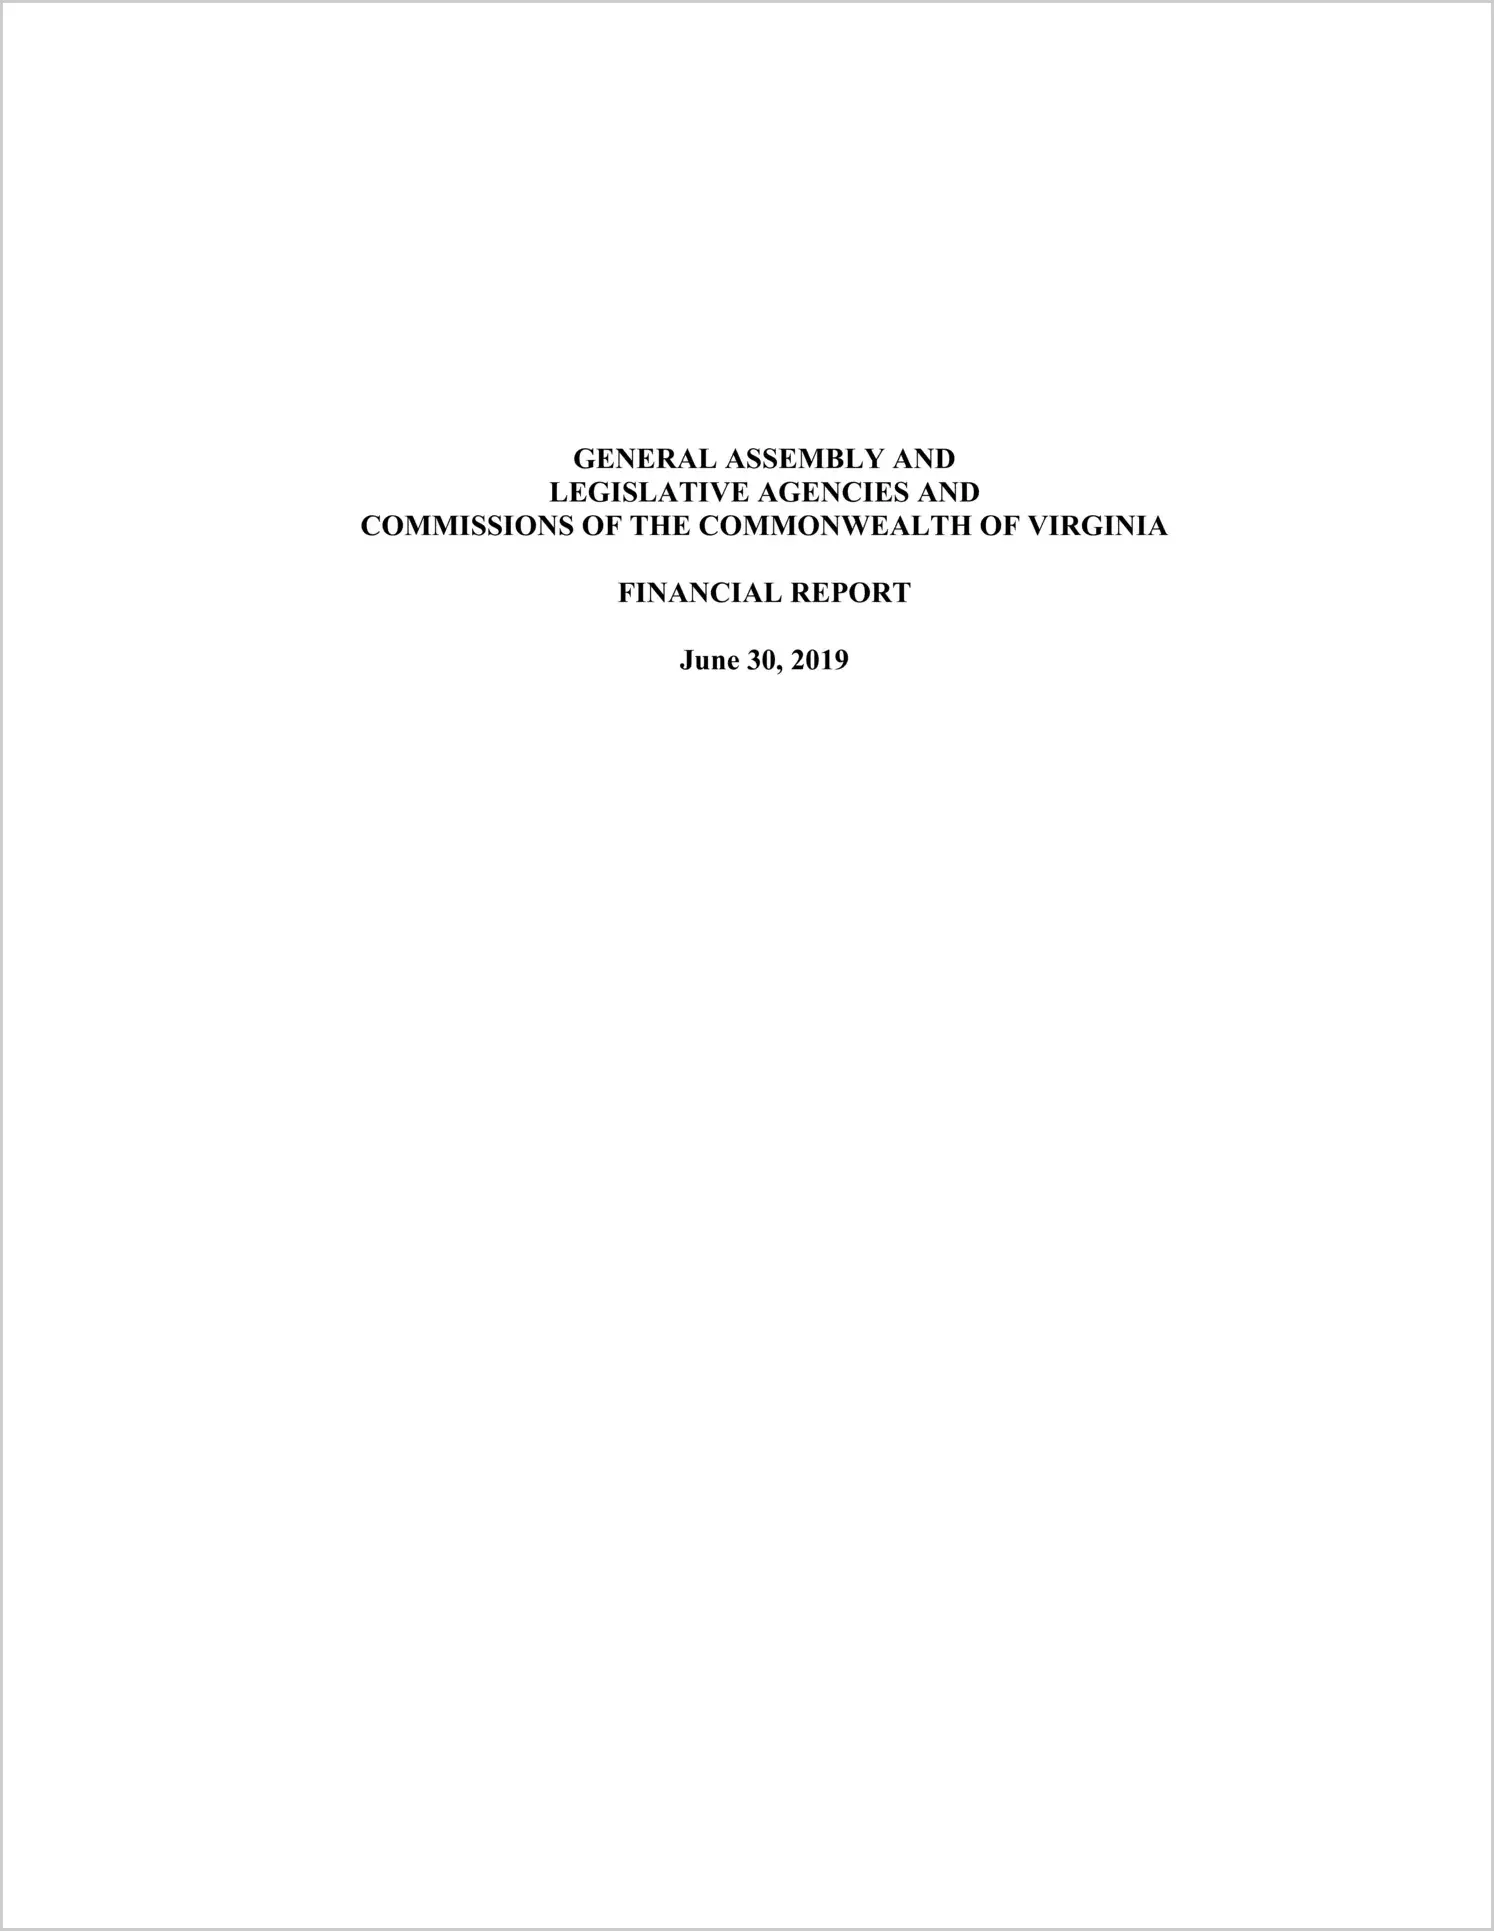 General Assembly and Legislative Agencies and Commissions of the Commonwealth of Virginia Financial Report for the Fiscal Year ended June 30, 2019